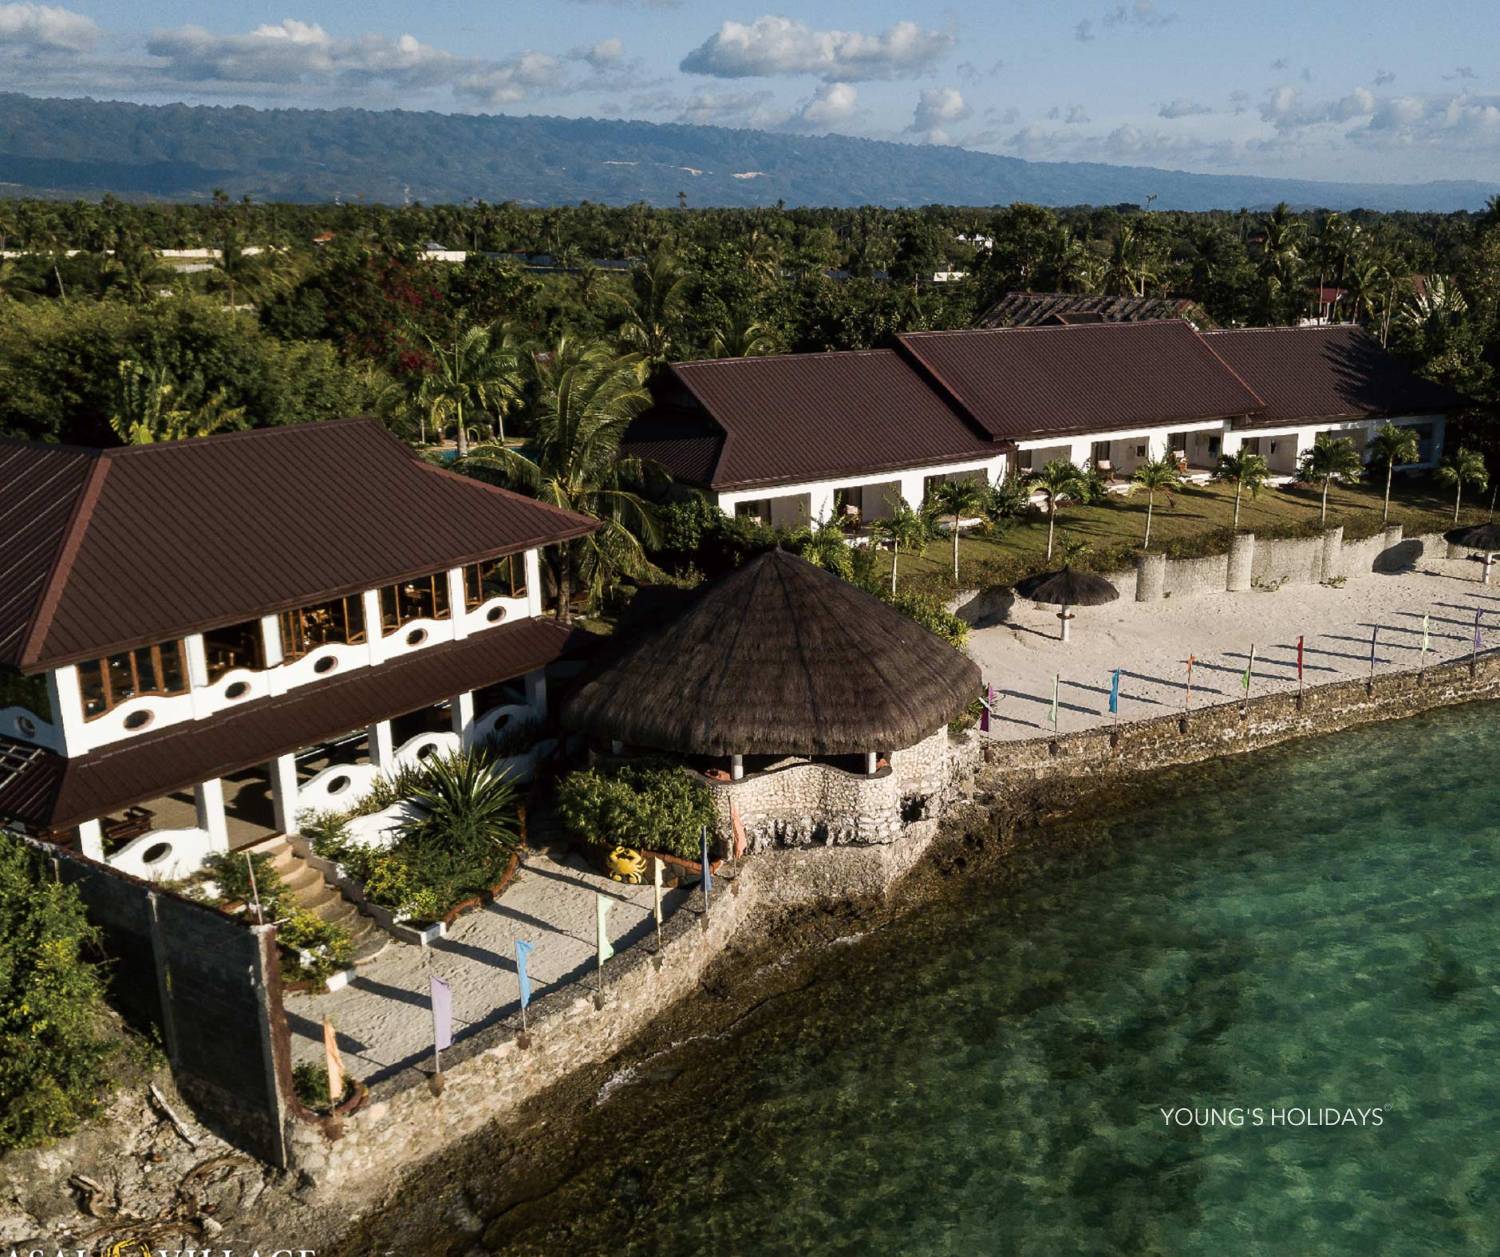 【Philippine】Moalboal Kasai Village Dive Resort 5 days 4 nights diving package